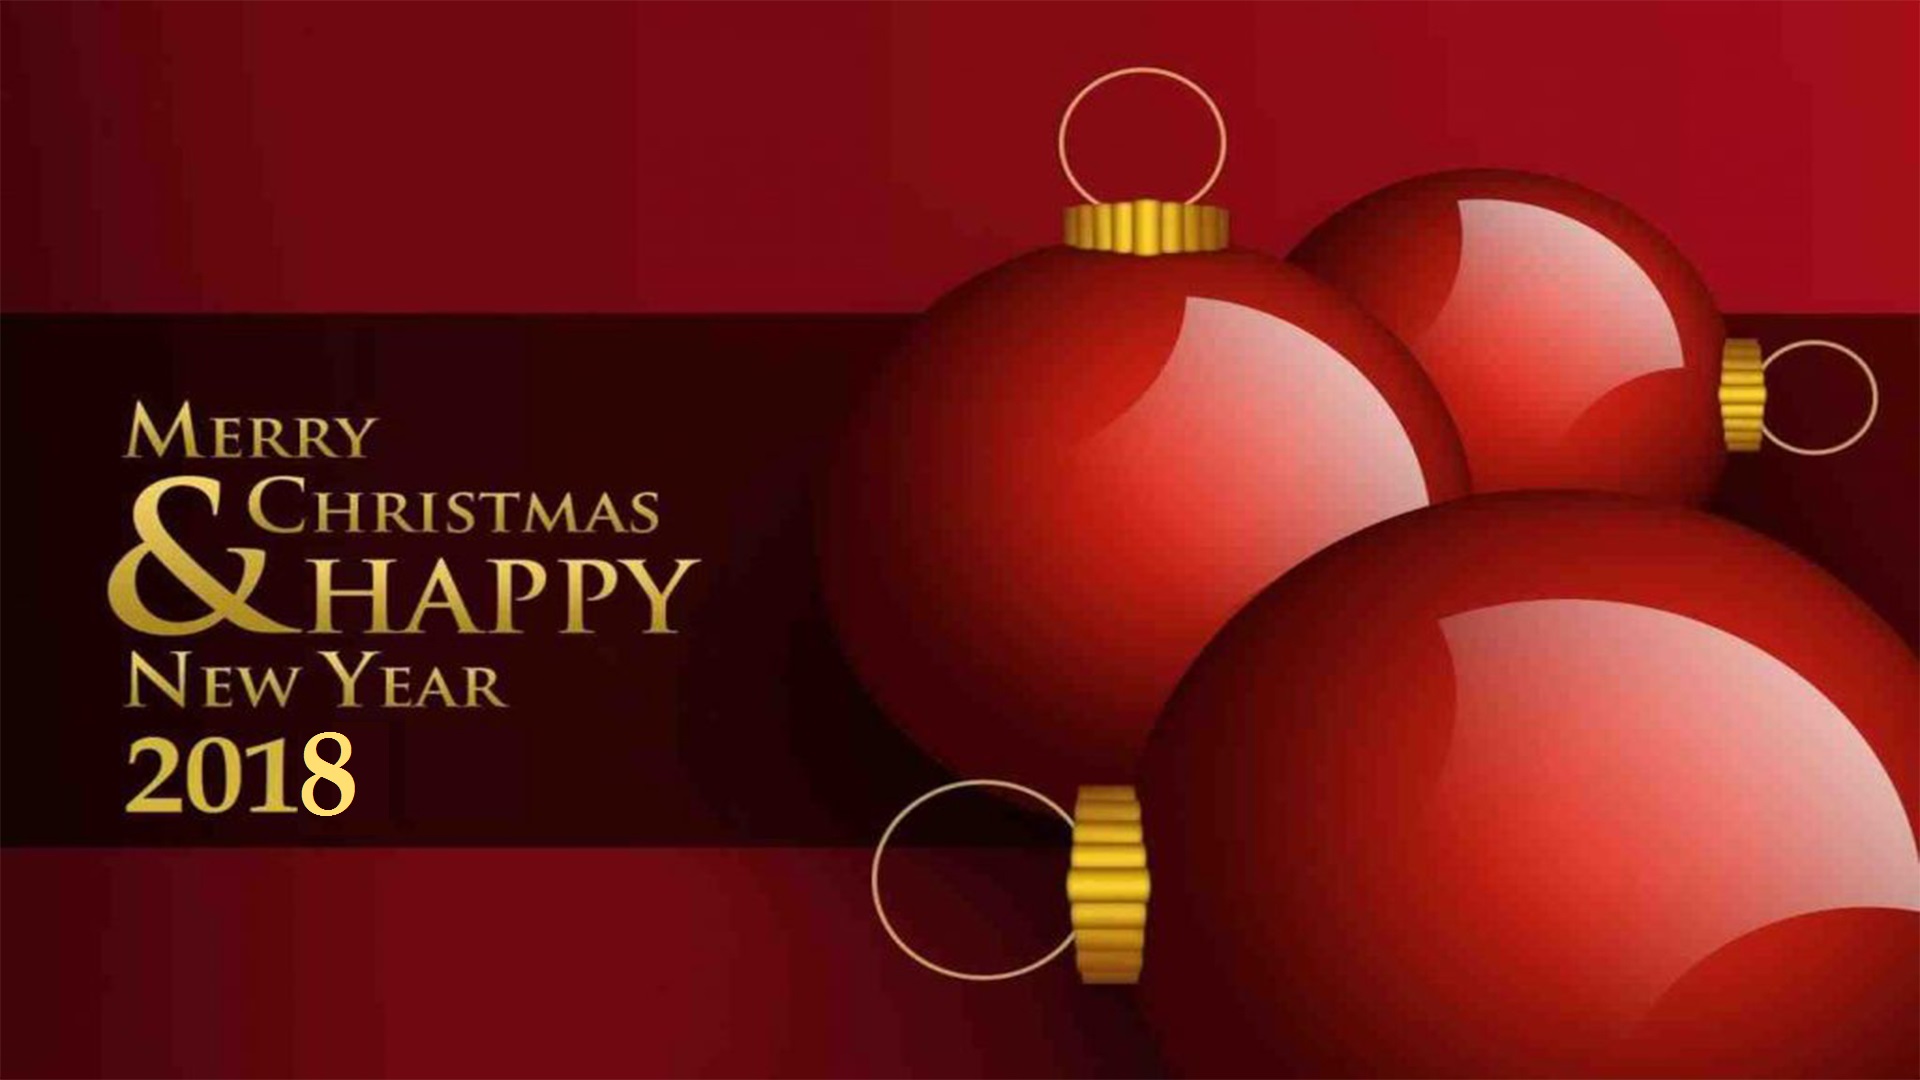 Merry Christmas & Happy New Year hd picture